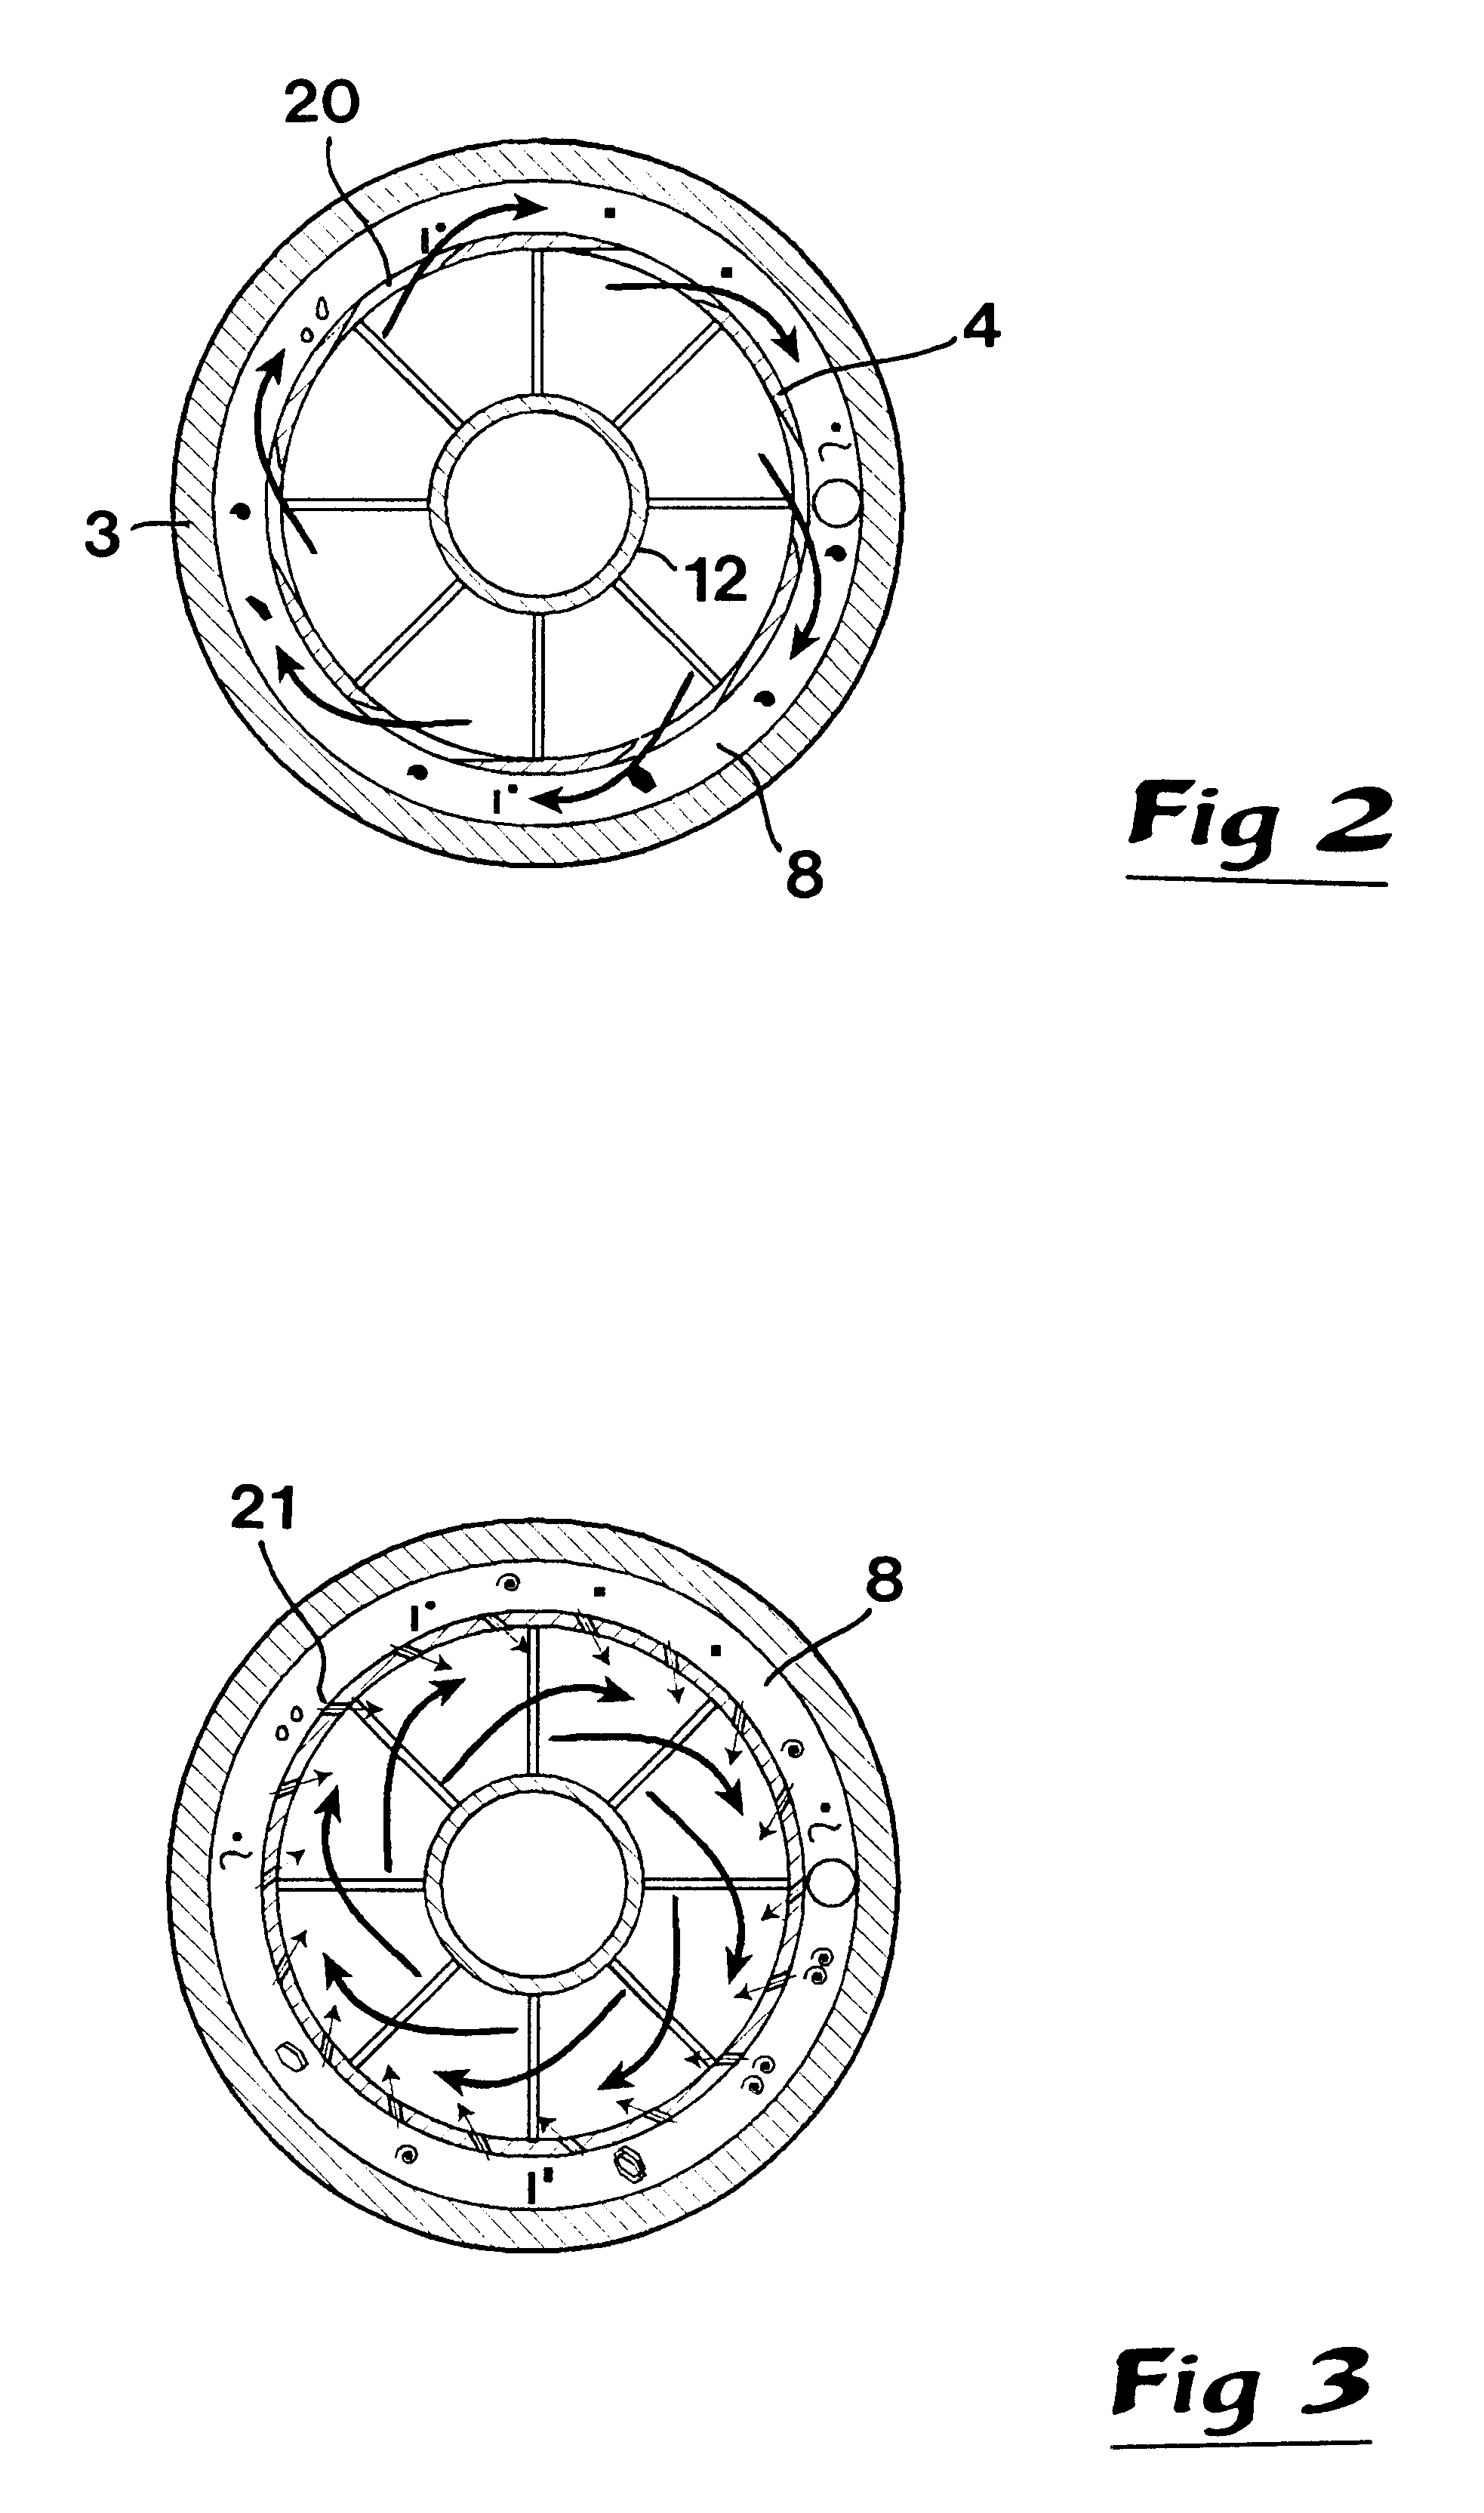 Device for the separation of solid objects from a flowing fluid